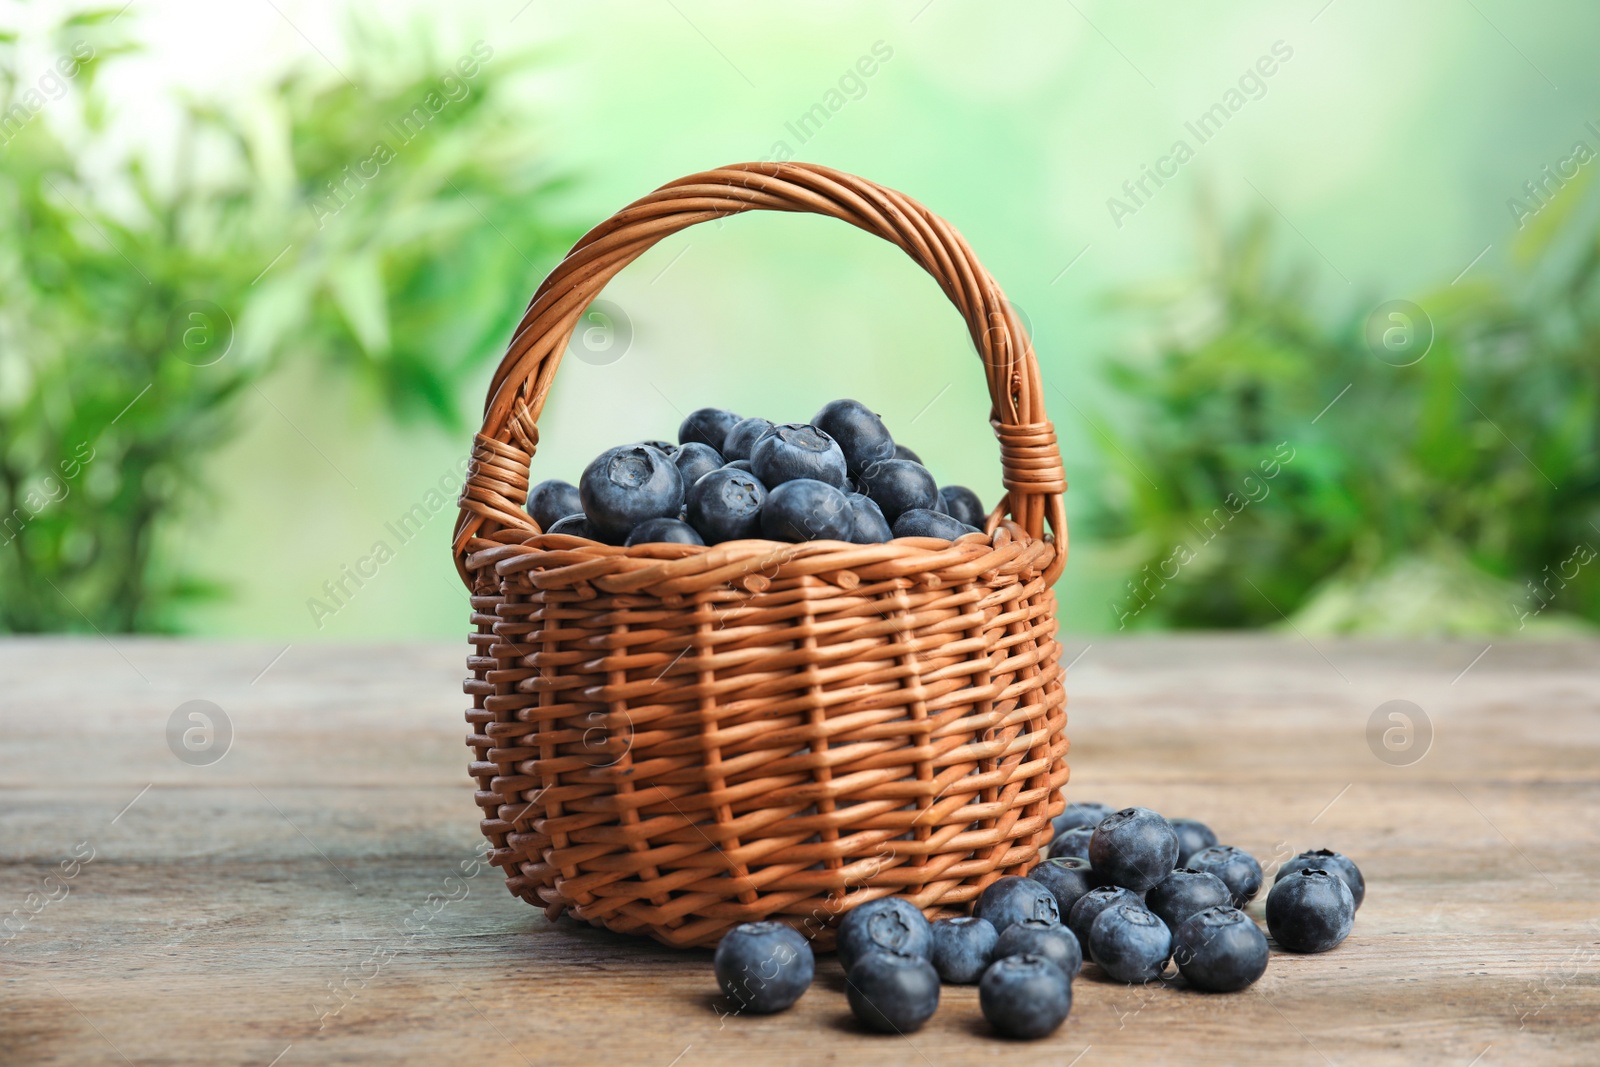 Photo of Wicker basket with fresh blueberries on wooden table against blurred green background